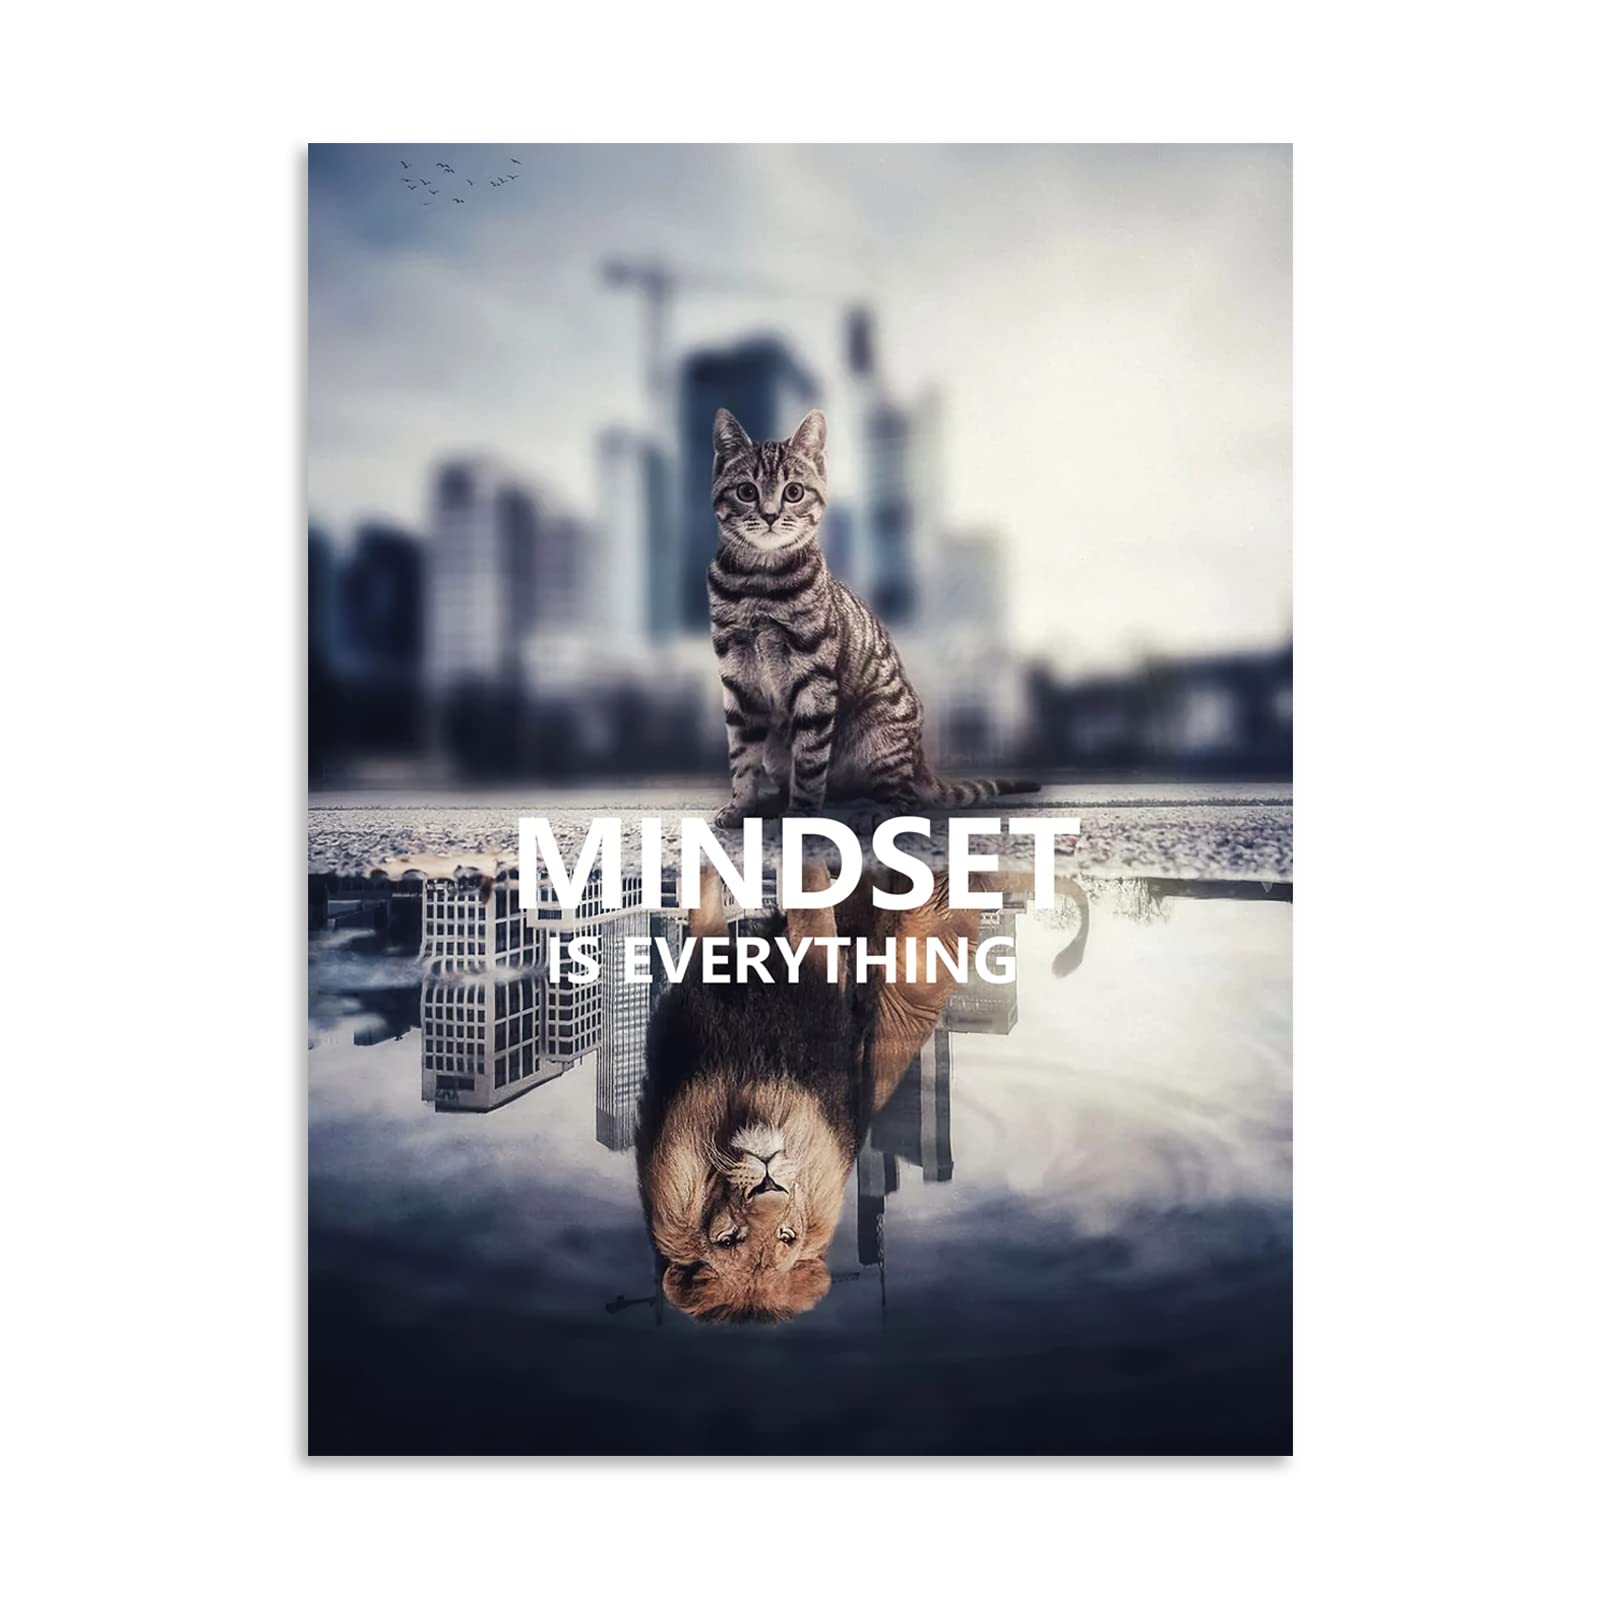 Inspirational Wall Art Cute Animal Cat Lion Poster Painting Mindset is Everything Inspiring Print Artwork Picture Wooden Living Room Office Home Decoration Picture Frame Ready to Hang[18 W x 24 H]